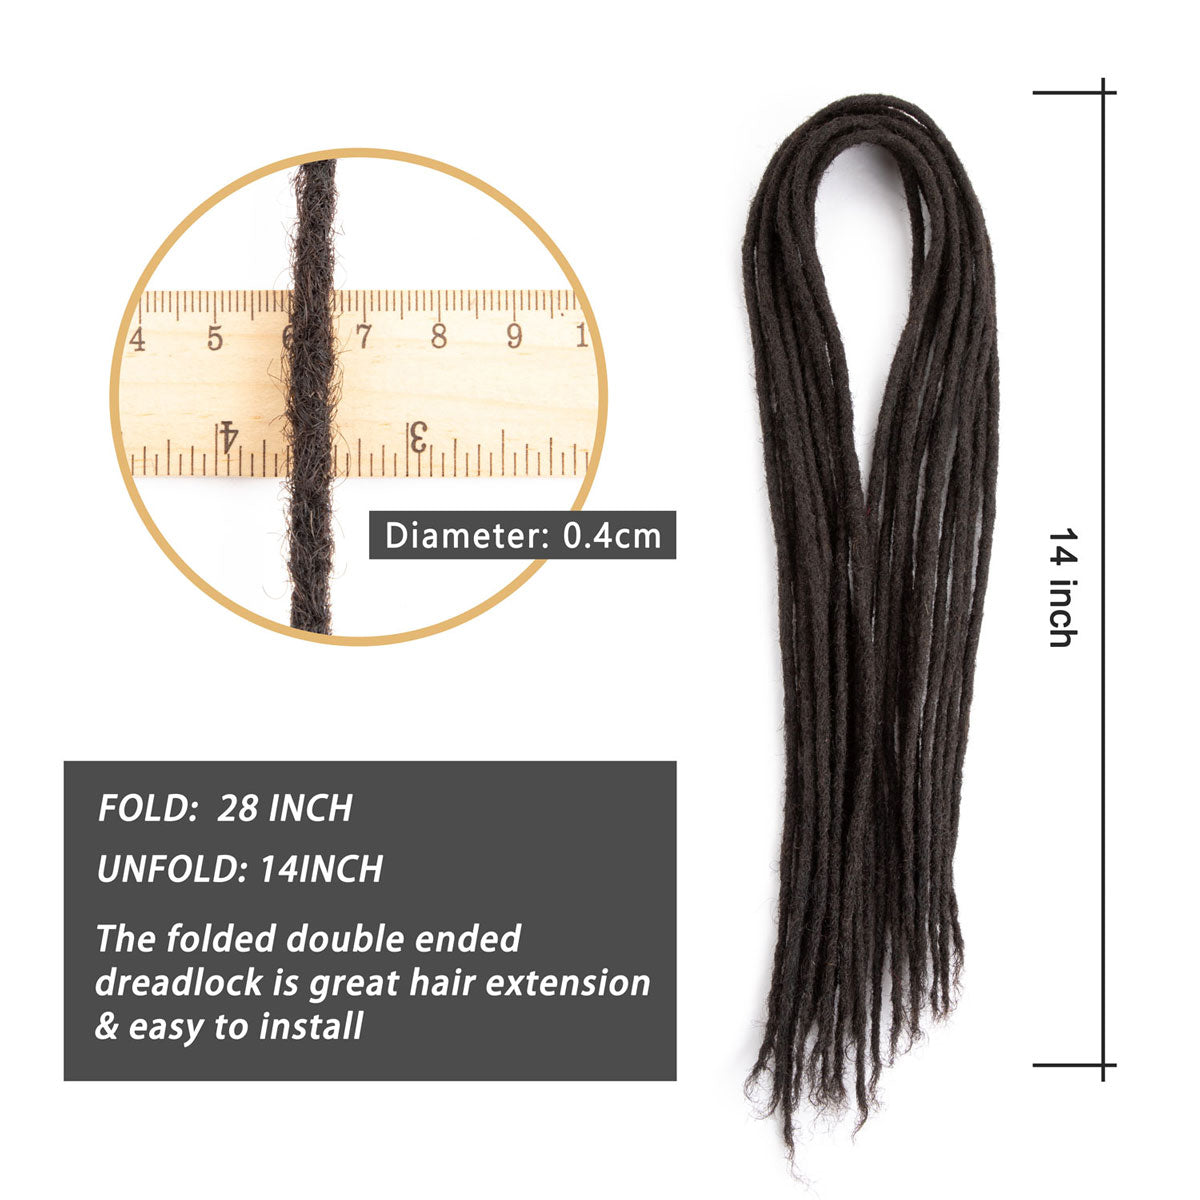 Double Pointy End Dreadlocks Extensions Human Hair Permanent Dreads Locs Hair Extensions for Retwist Natural Color 0.4cm Thin  28 Inch